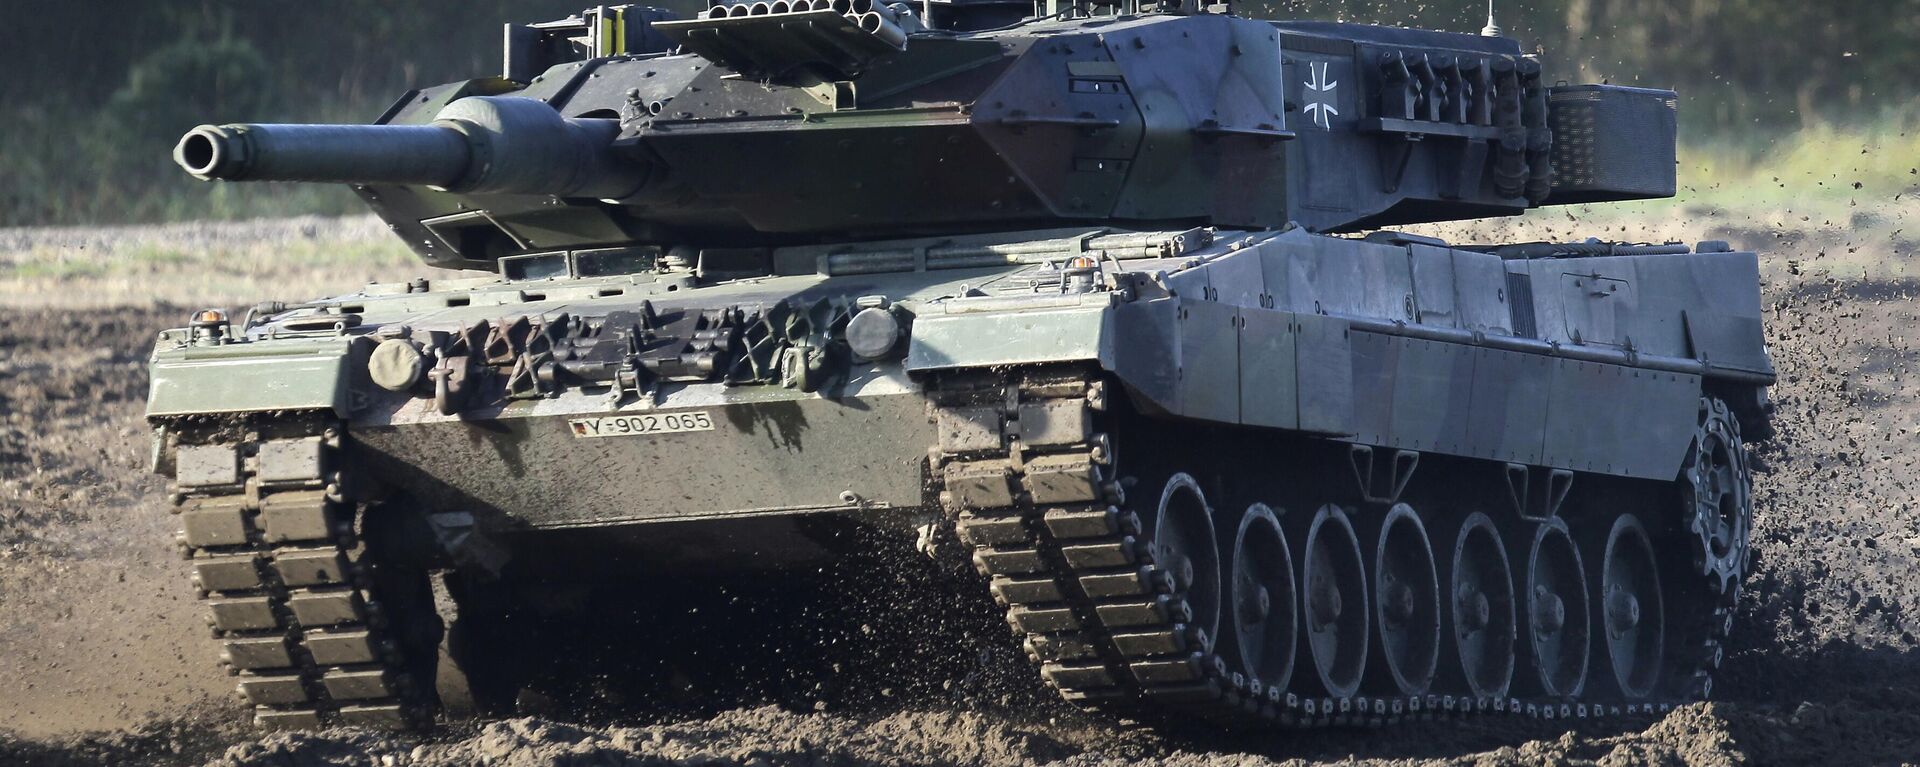 A Leopard 2 tank is pictured during a demonstration event held for the media by the German Bundeswehr in Munster near Hannover, Germany, Wednesday, Sept. 28, 2011. - Sputnik International, 1920, 26.01.2023